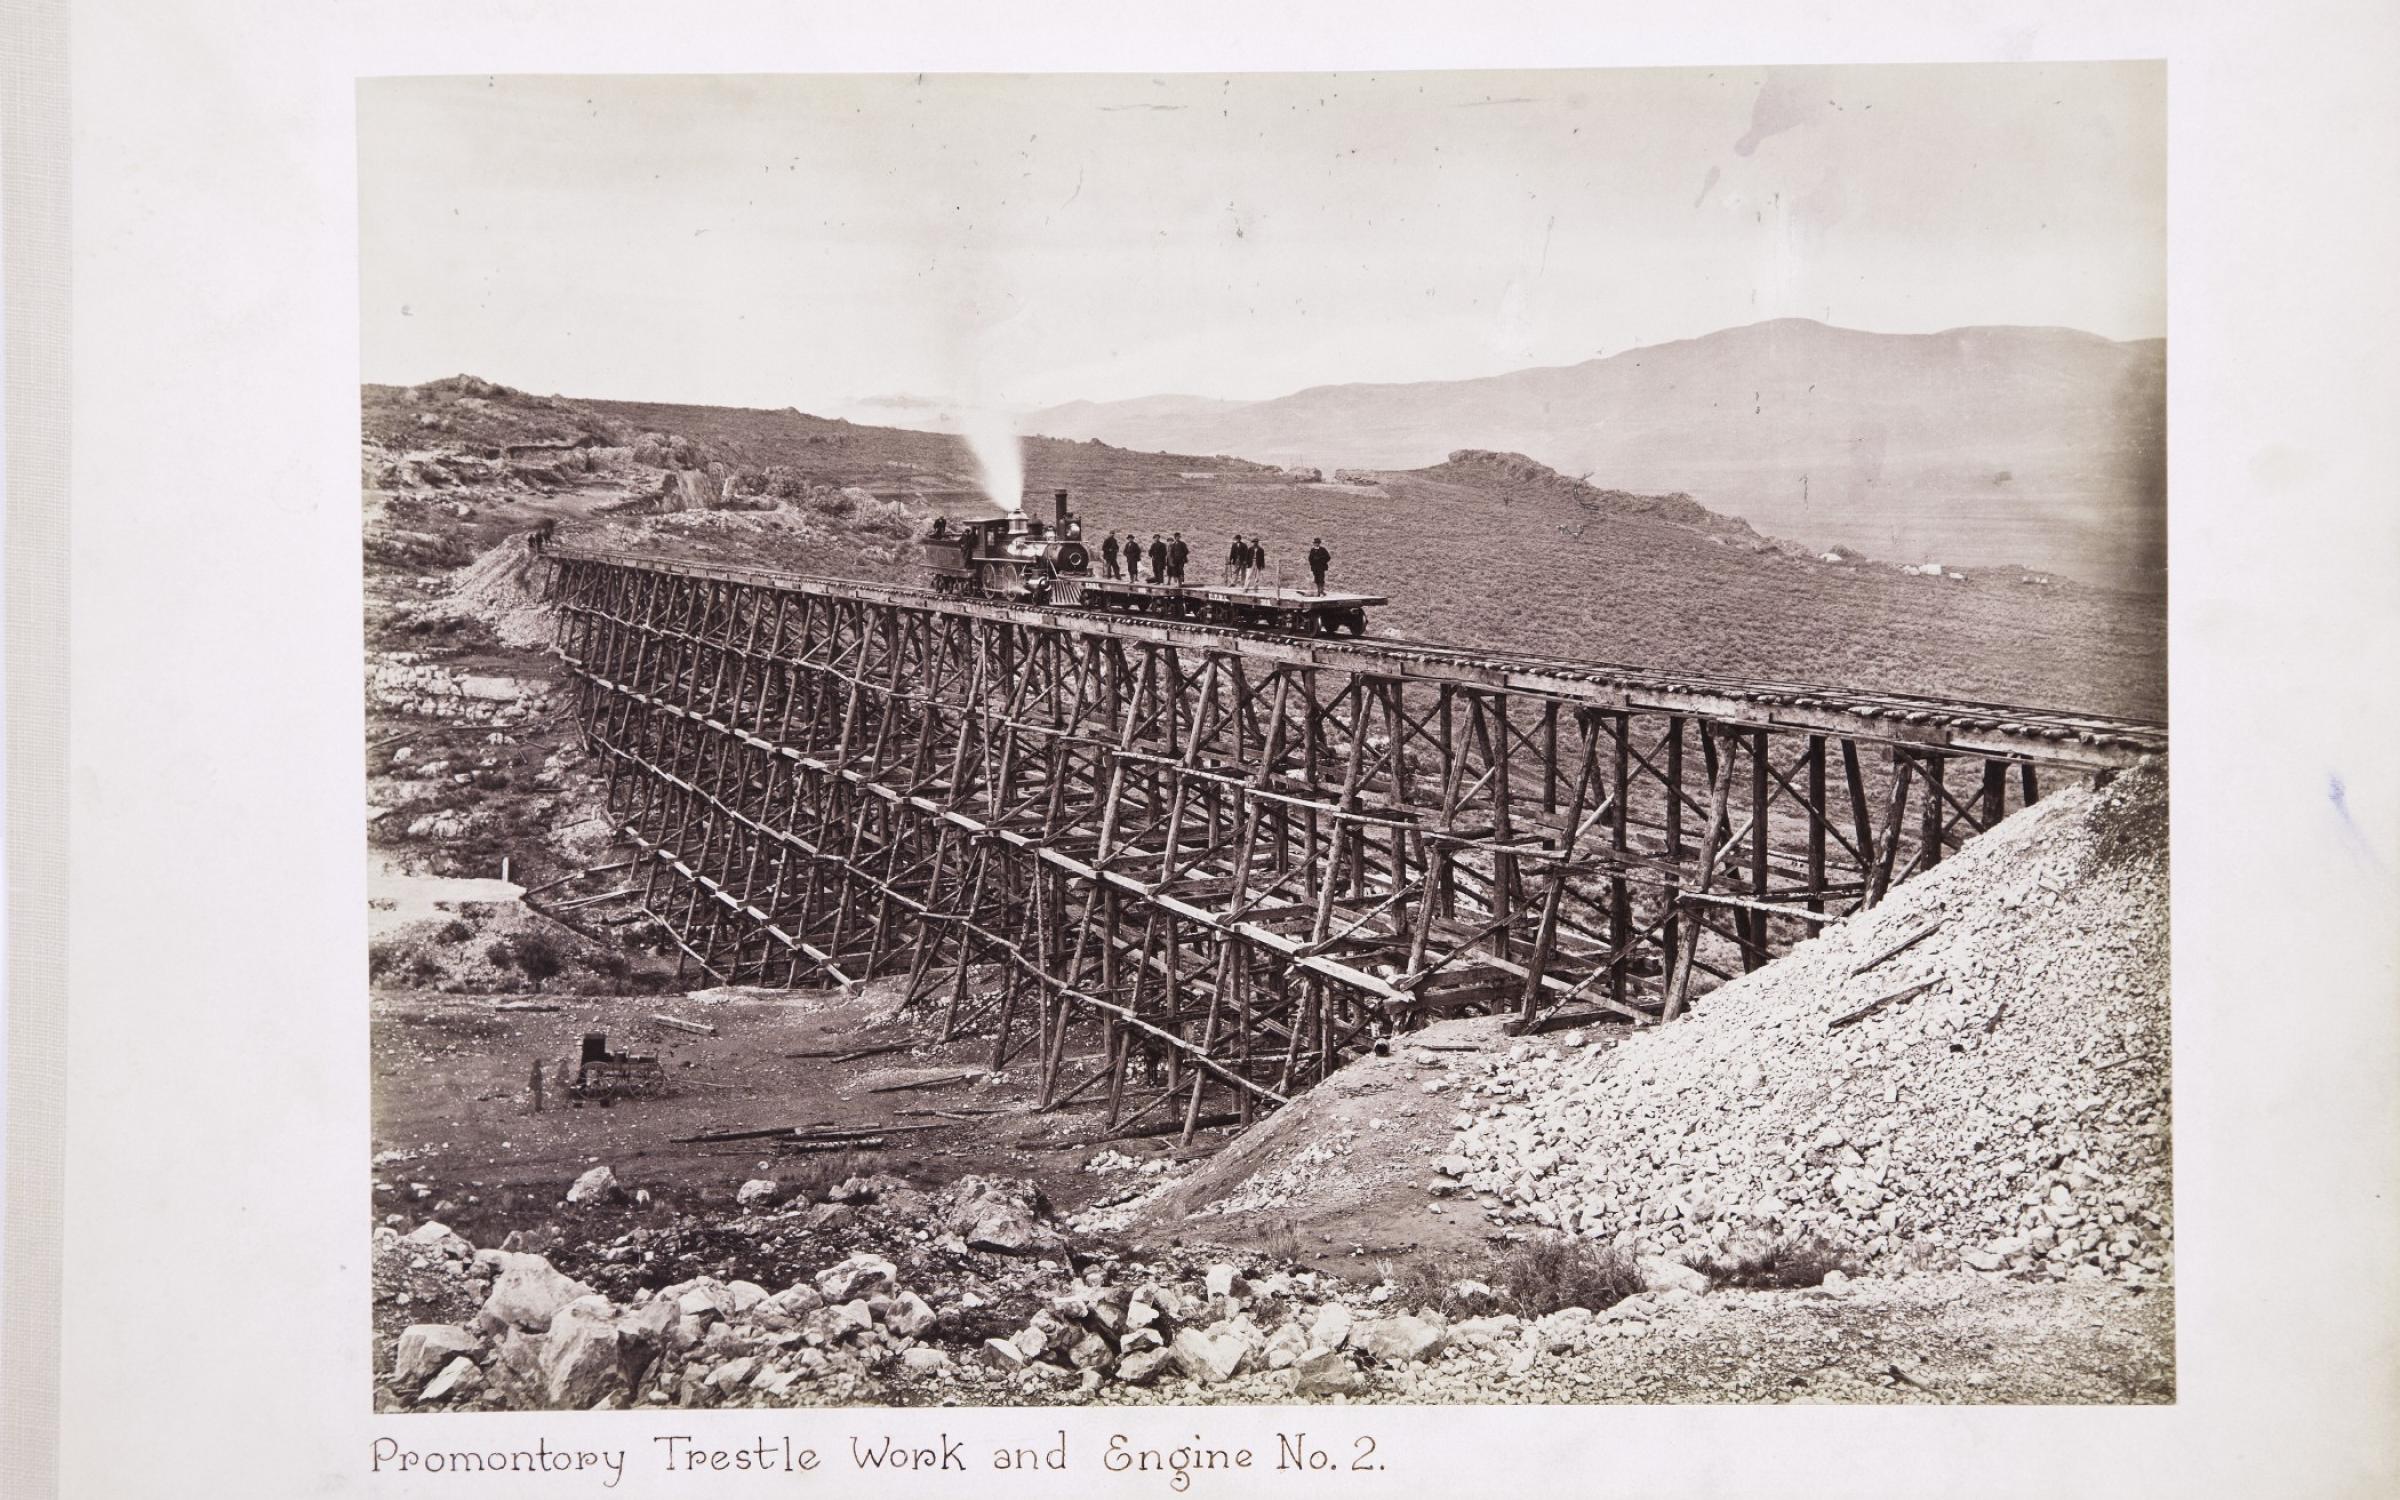 Andrew J. Russell, (American, 1829–1902), Promontory Trestle Work and Engine No. 2, 1869, albumen silver print, courtesy Union Pacific Railroad Museum 